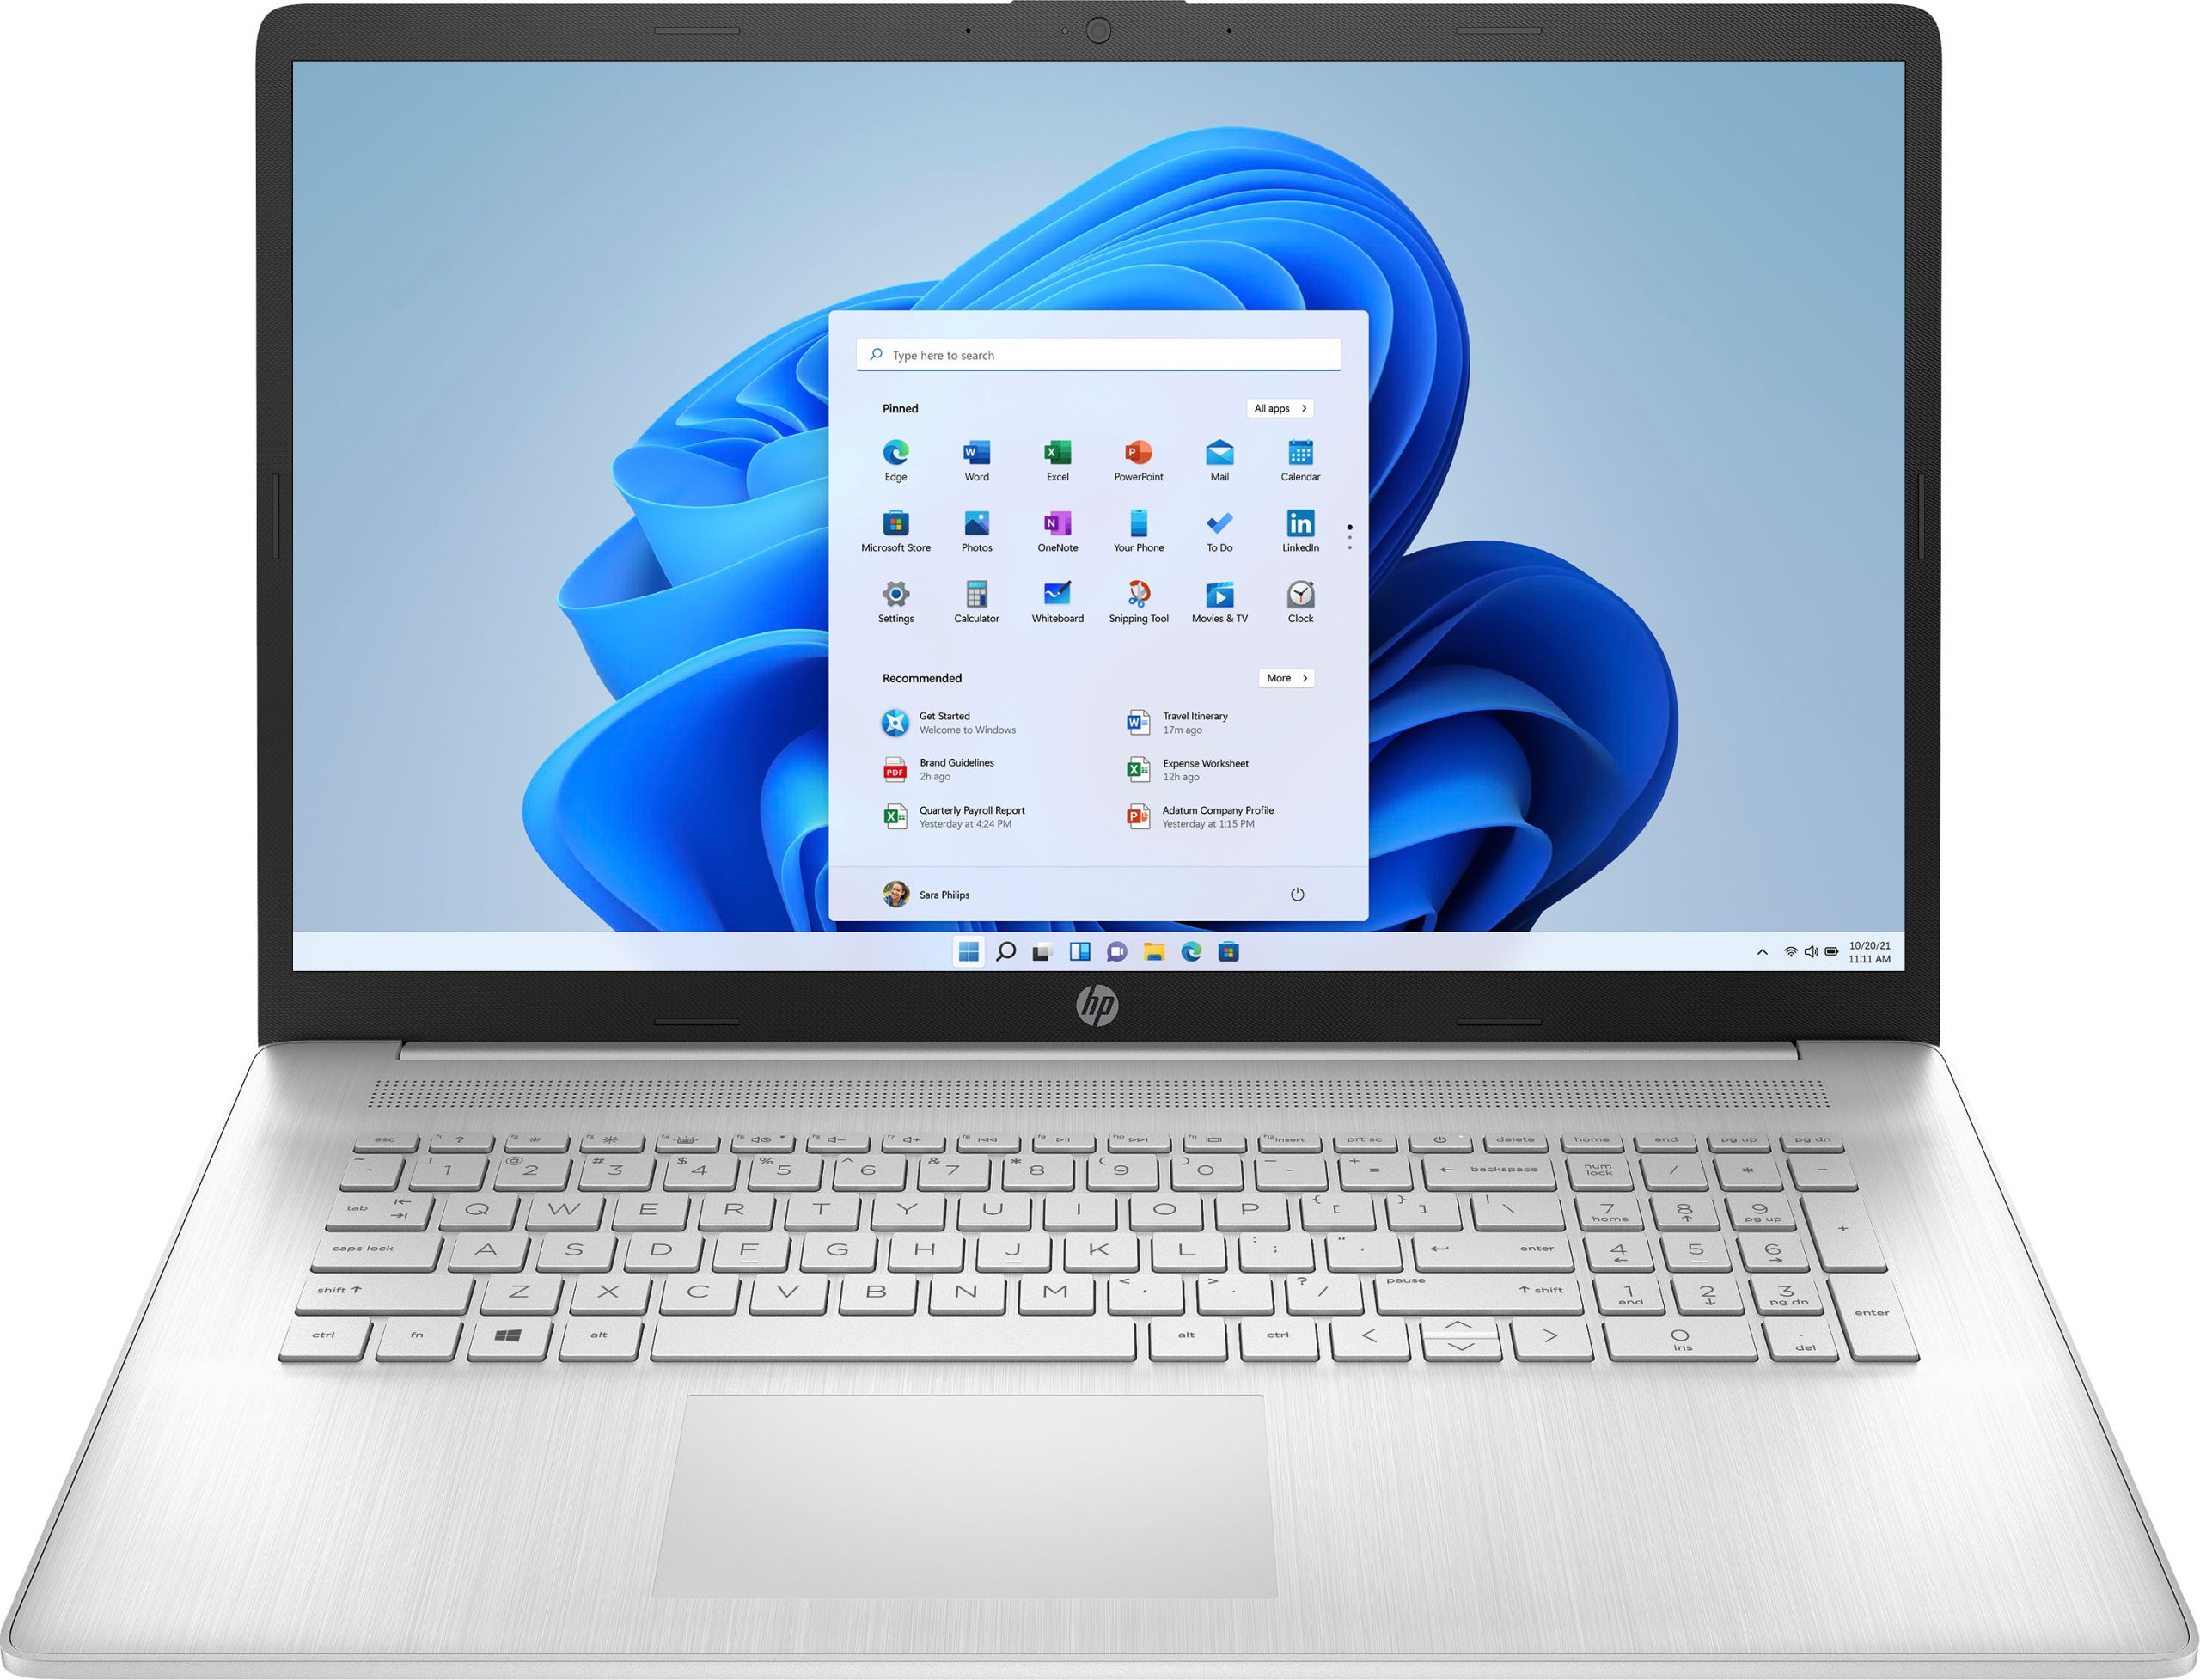 HP – 17.3″ Laptop – Intel Core i5 – 8GB Memory – 256GB SSD – Just $419.99 at Best Buy